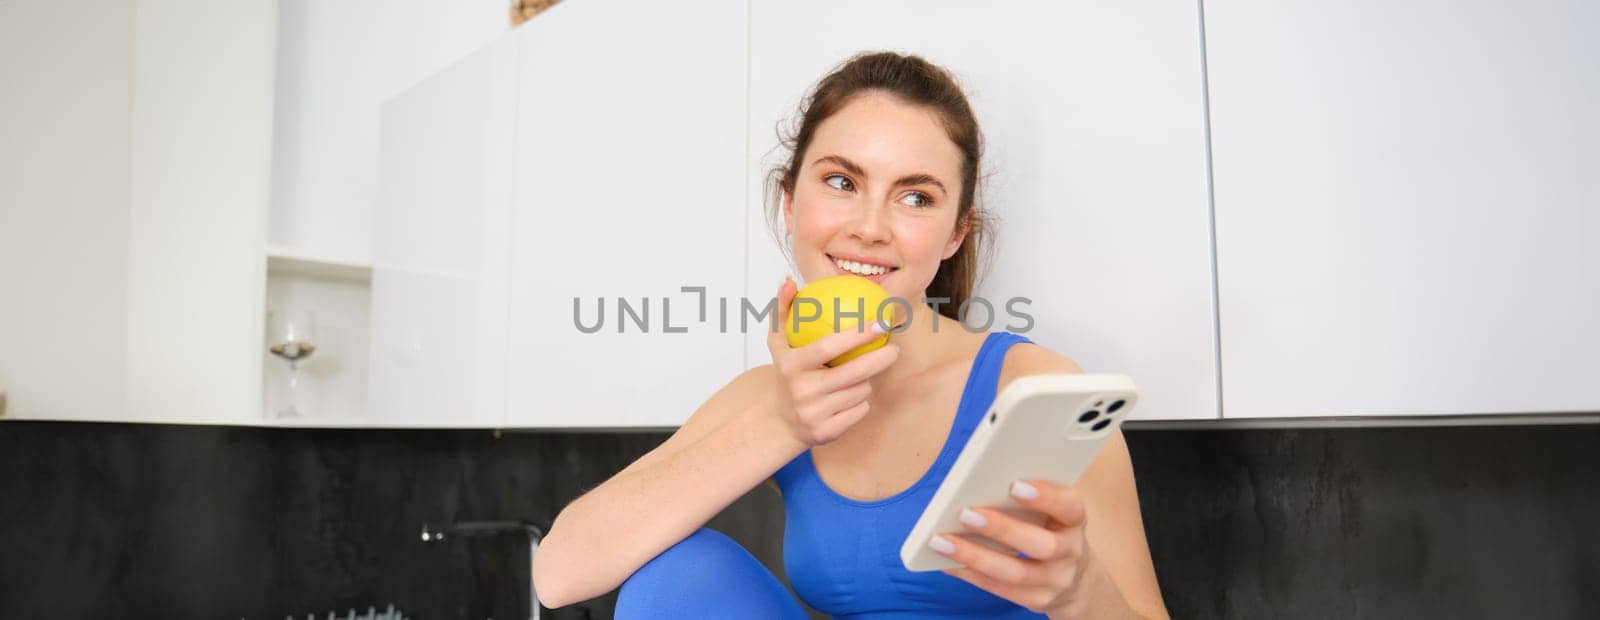 Portrait of sportswoman, girl eating and apple and looking at her social media, smartphone screen, having a snack in kitchen, wearing fitness activewear.